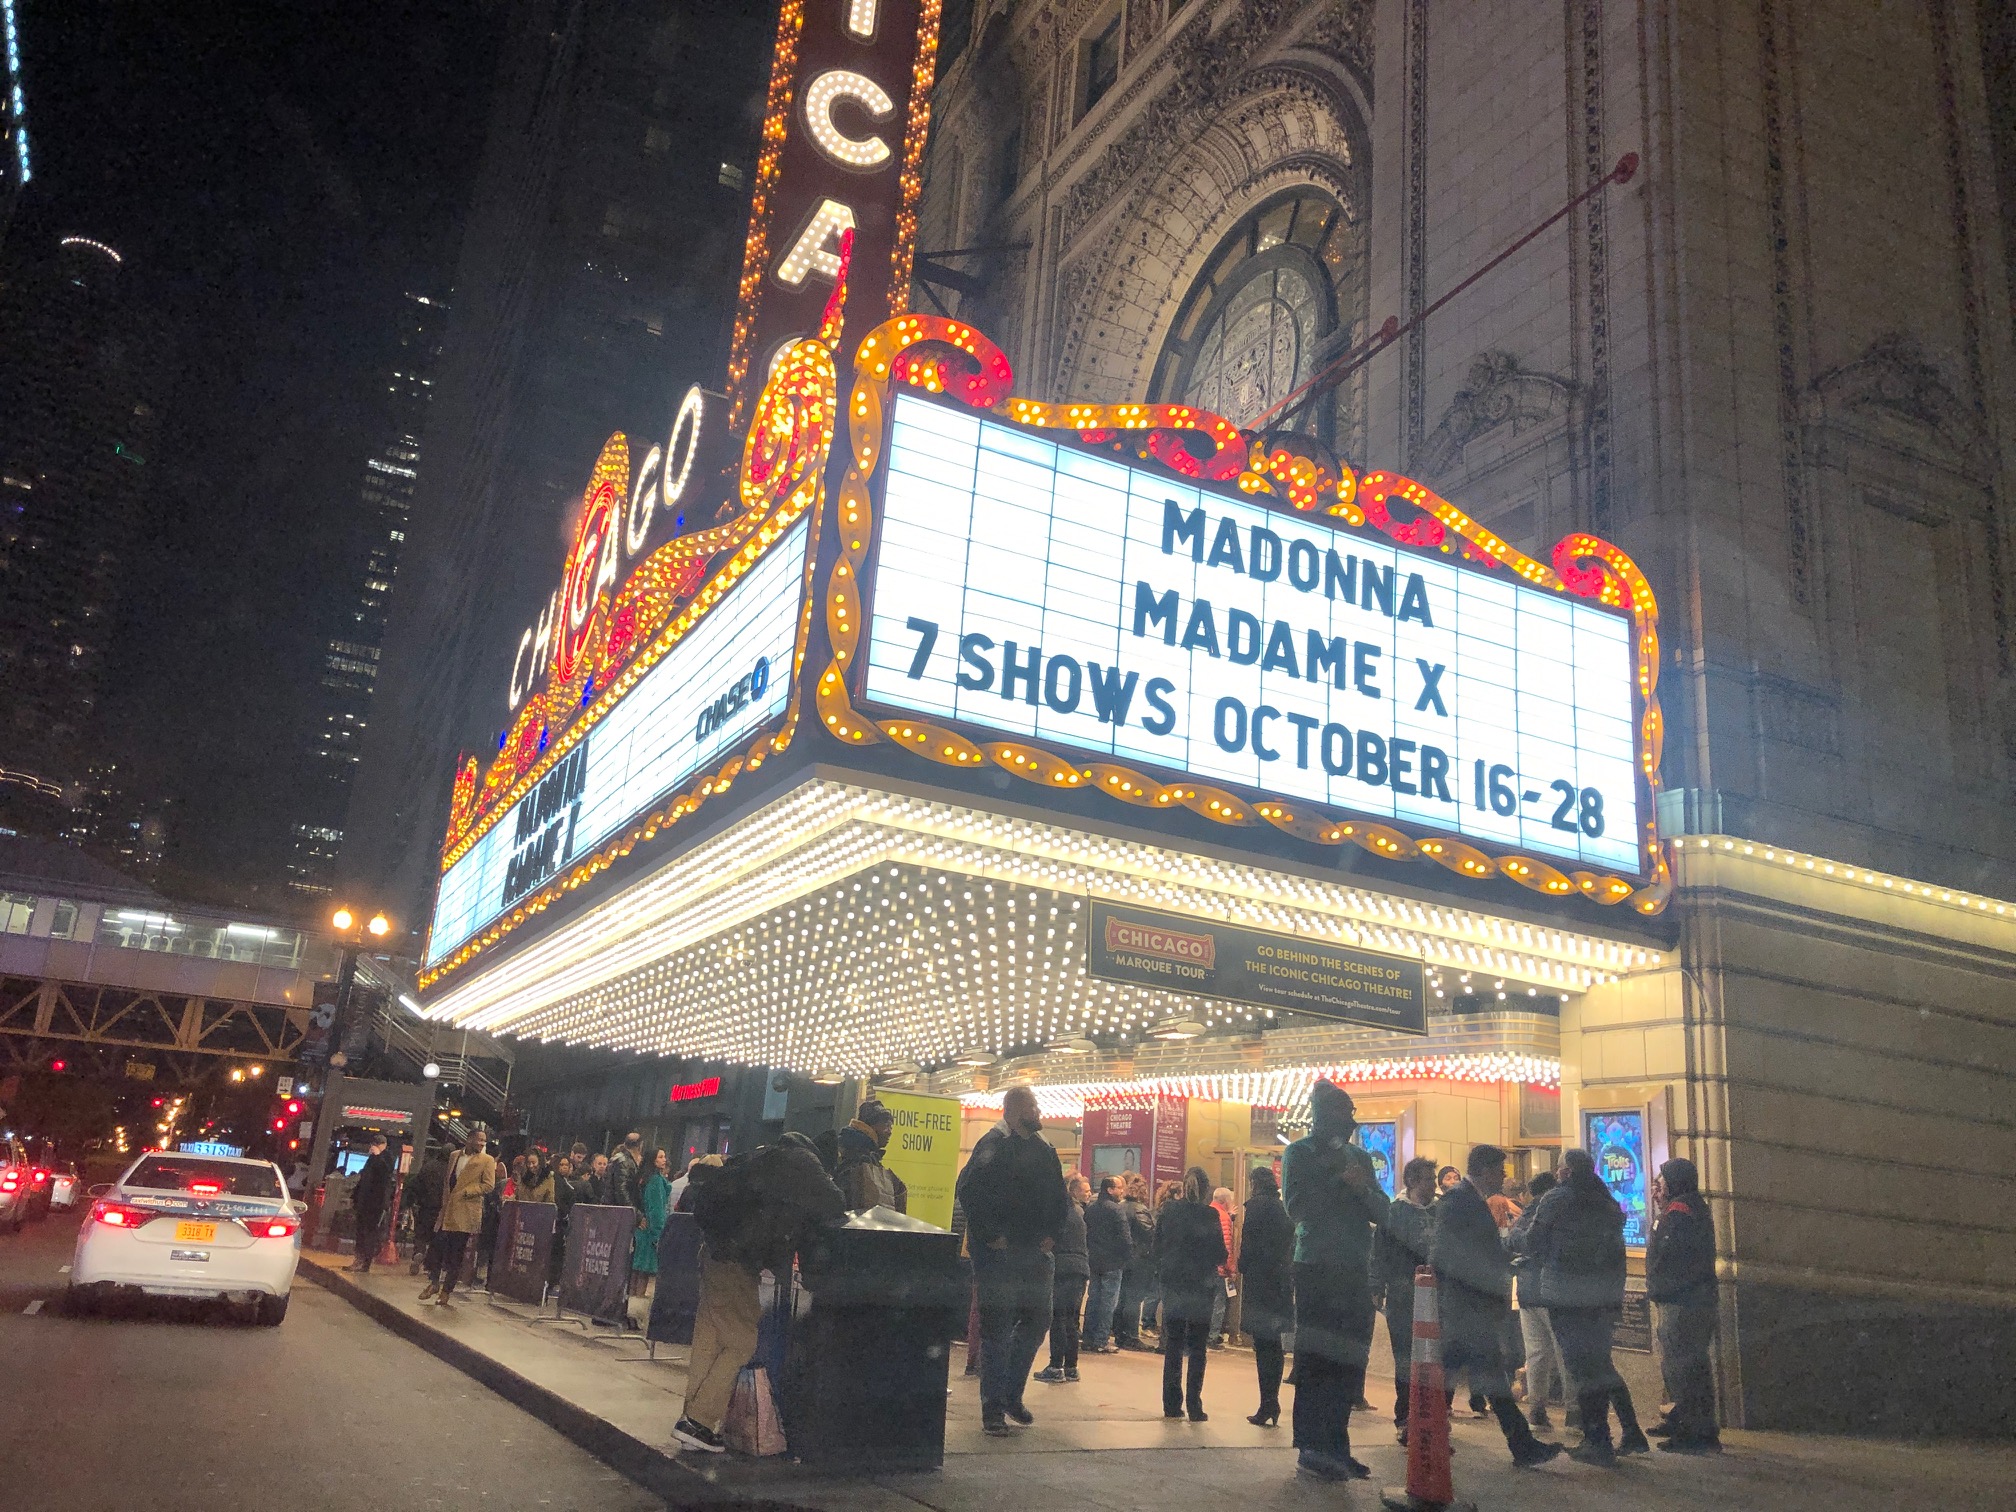 Bringing Her Madame X Tour To Chicago, Madonna Pulls Out All The Stops For Her Chicago Theatre Residency